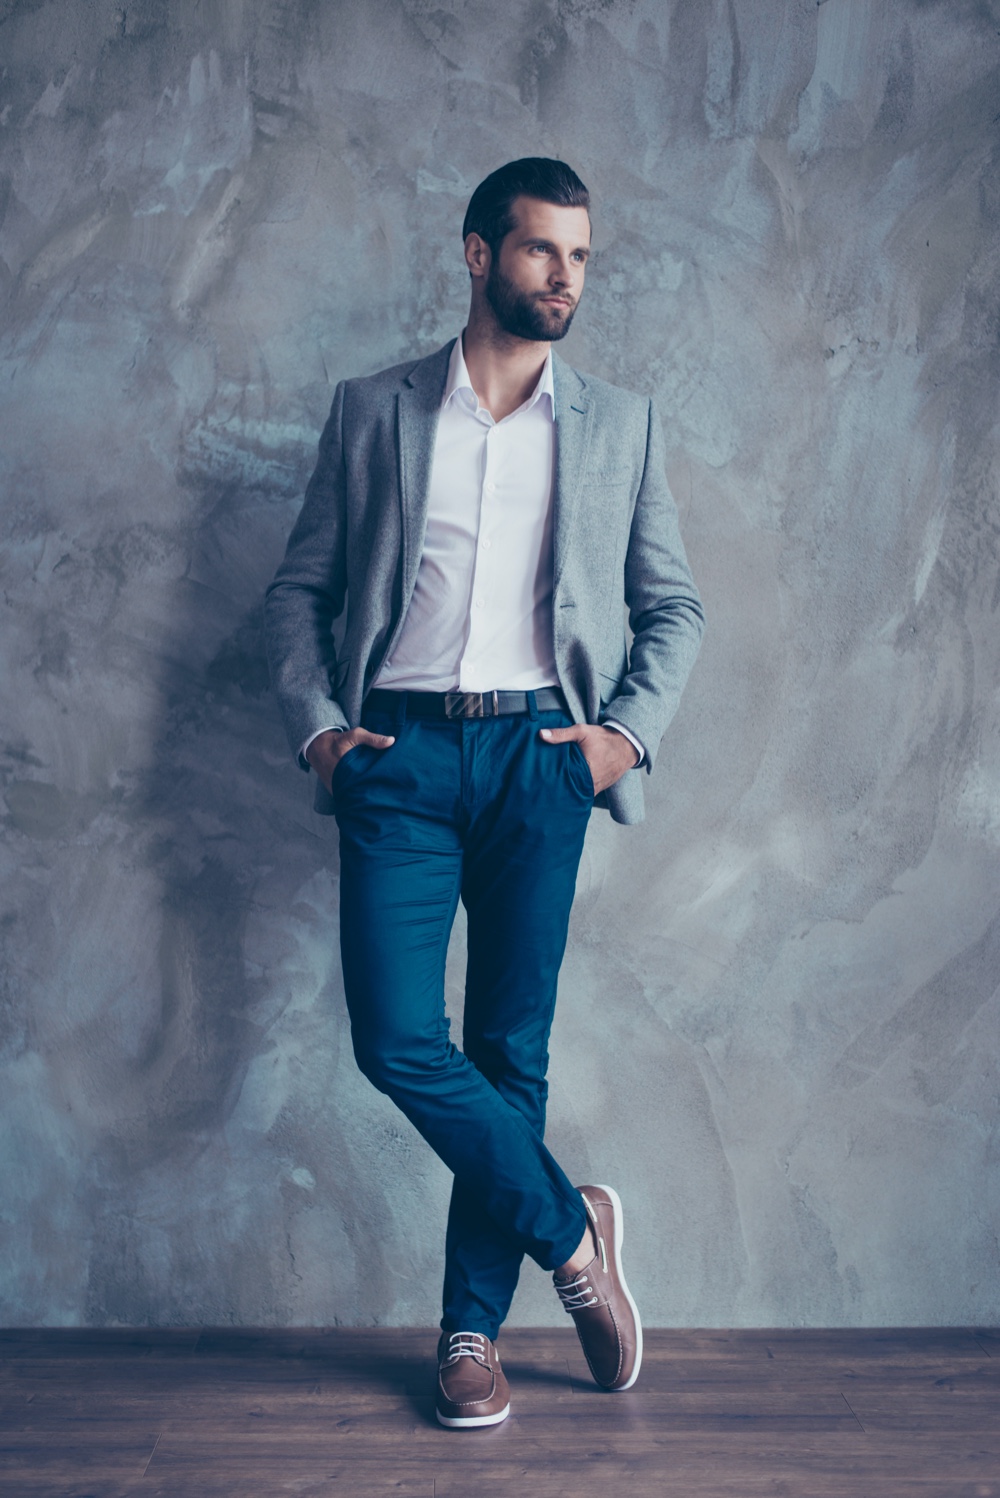 Smart Menswear Man Wearing Blazer with Pants and Sneakers